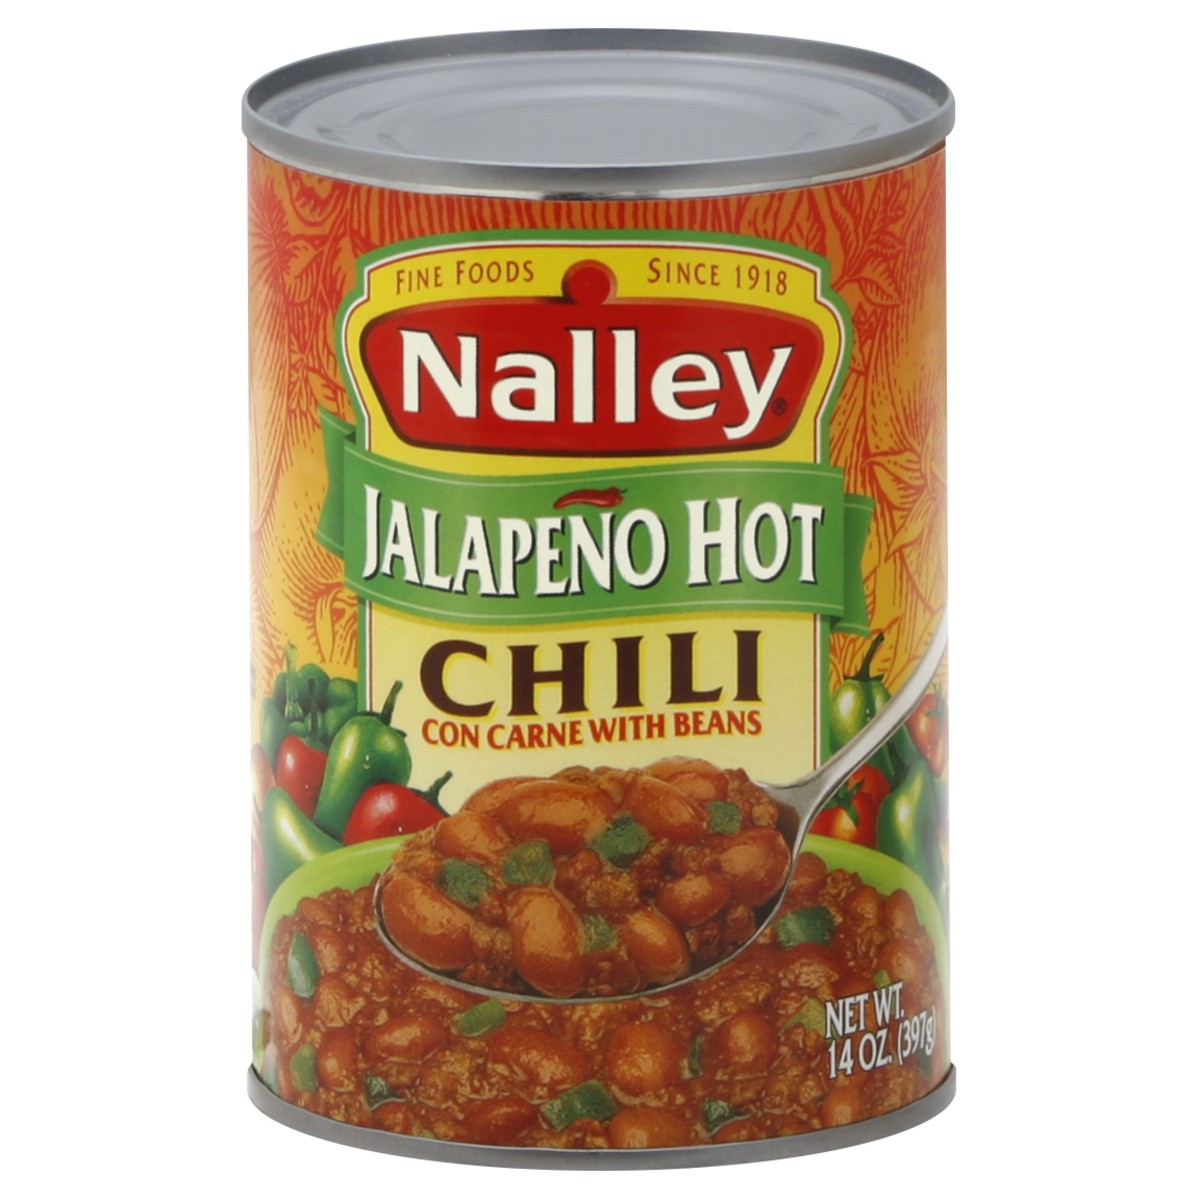 slide 3 of 3, Nalley Jalapeno Hot Chili Con Carne With Beans, 14 oz., 14 oz